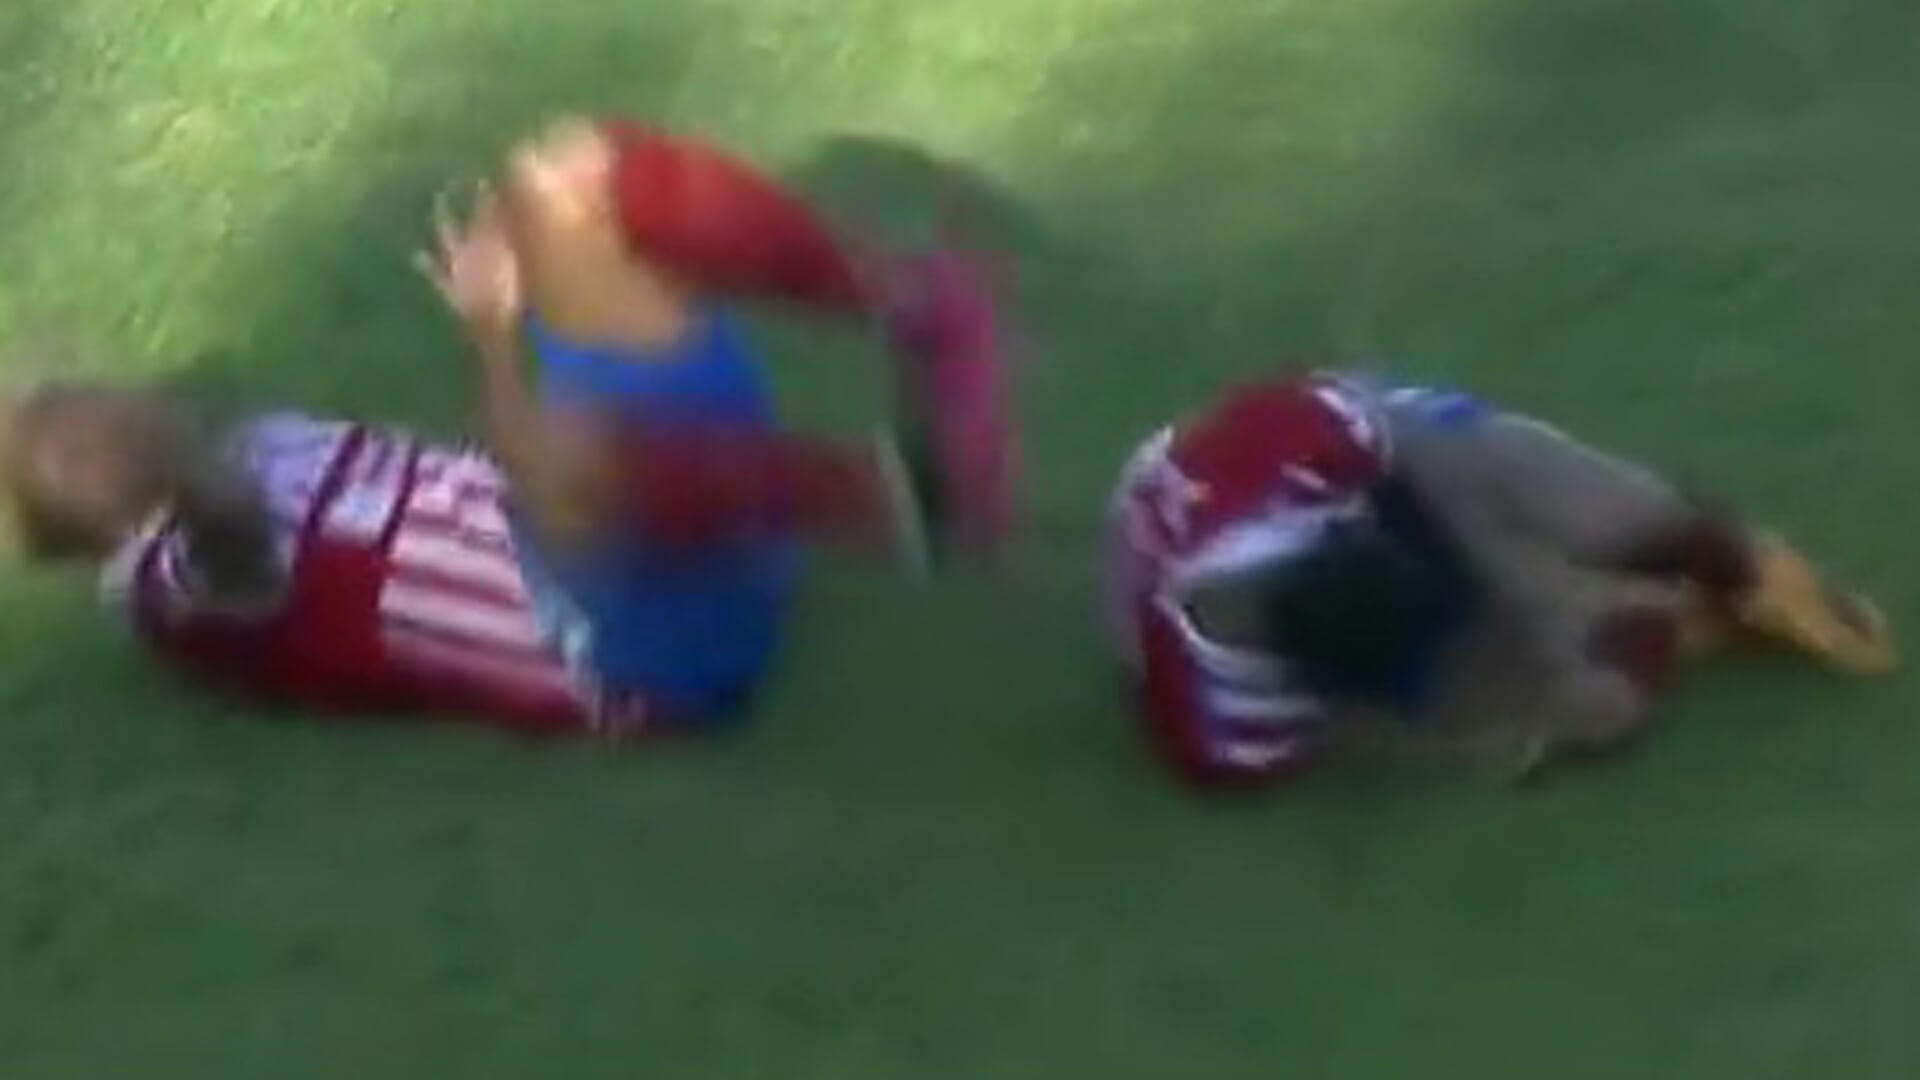 Watch footballer’s shocking lunge leave TWO opponents rolling in agony as fans demand double 'life sentence’